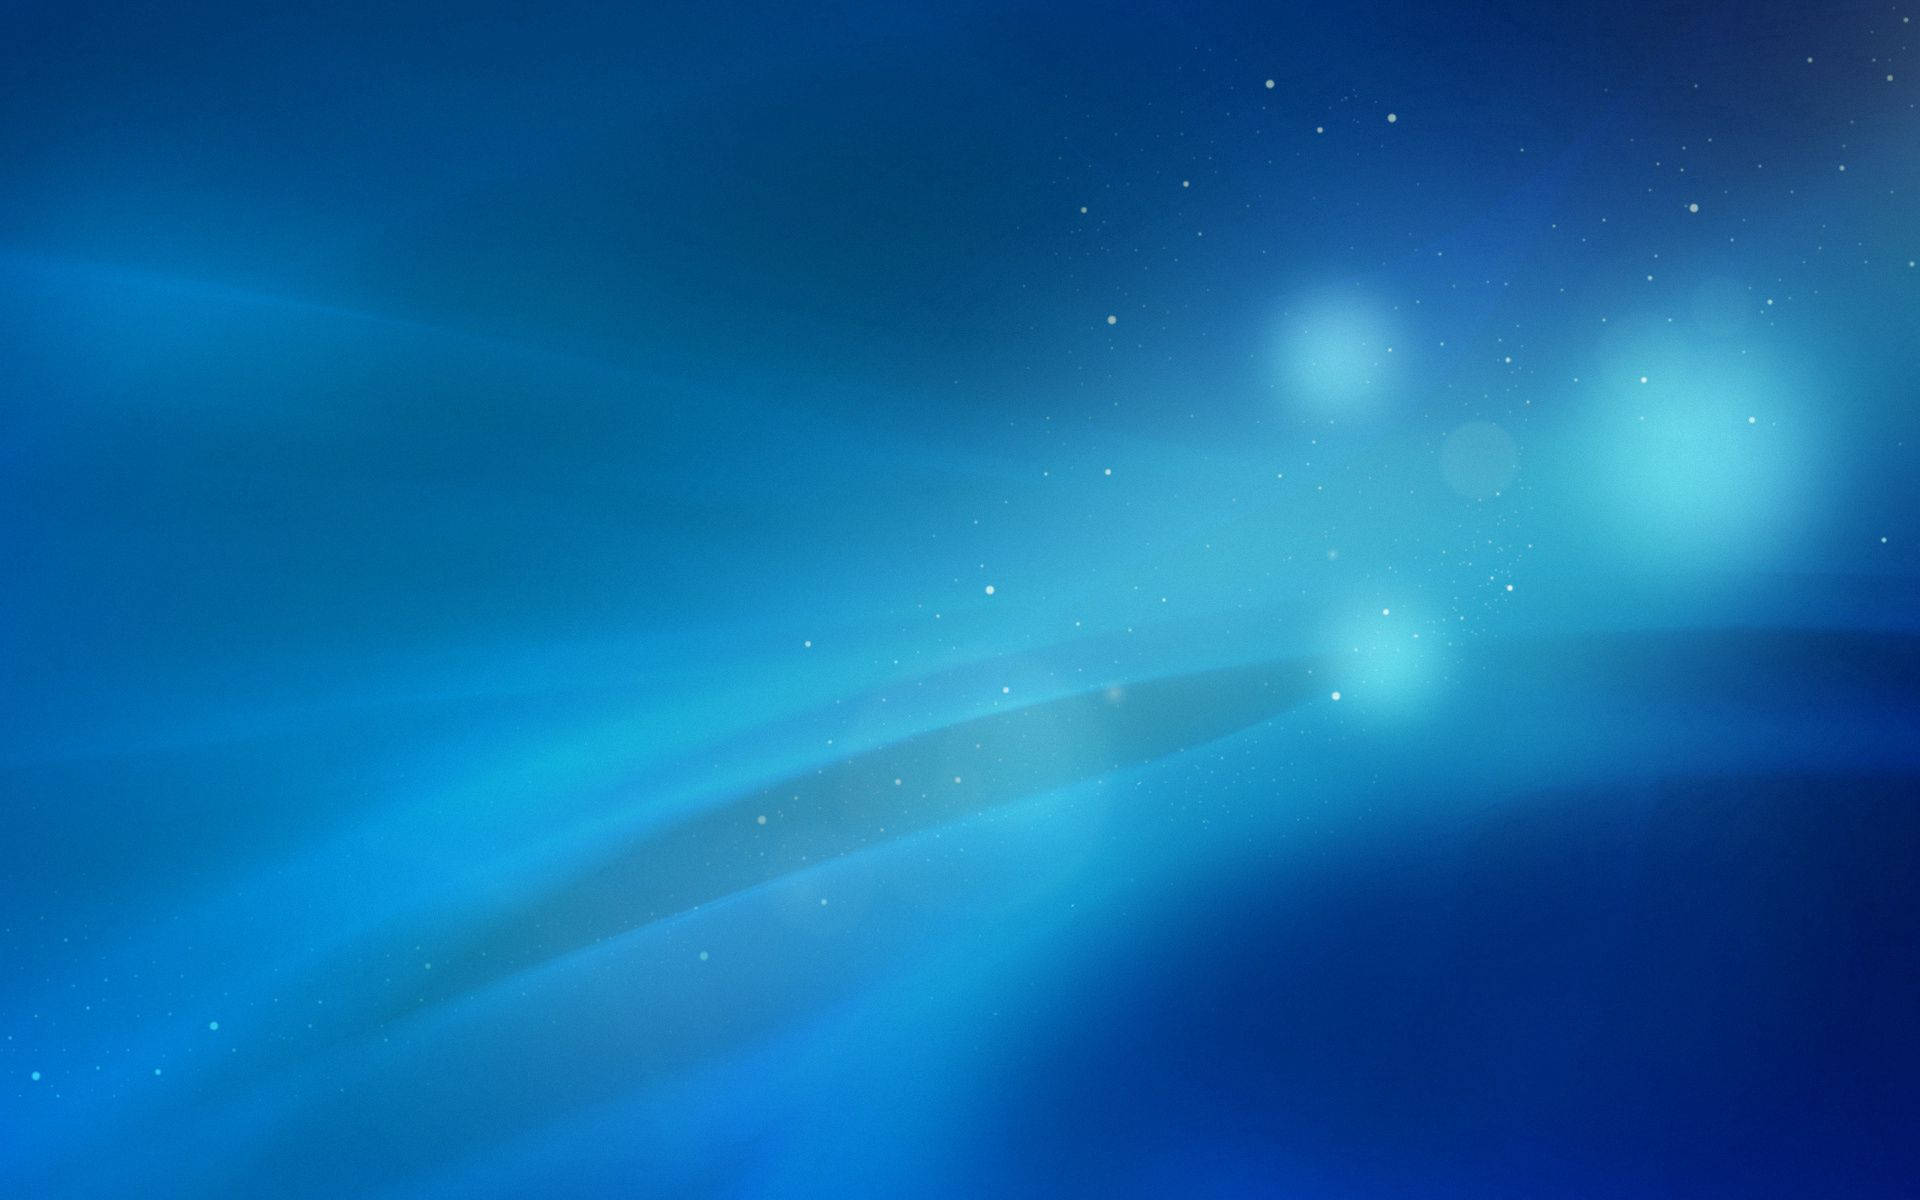 Blue Abstract Blurred Spots Background